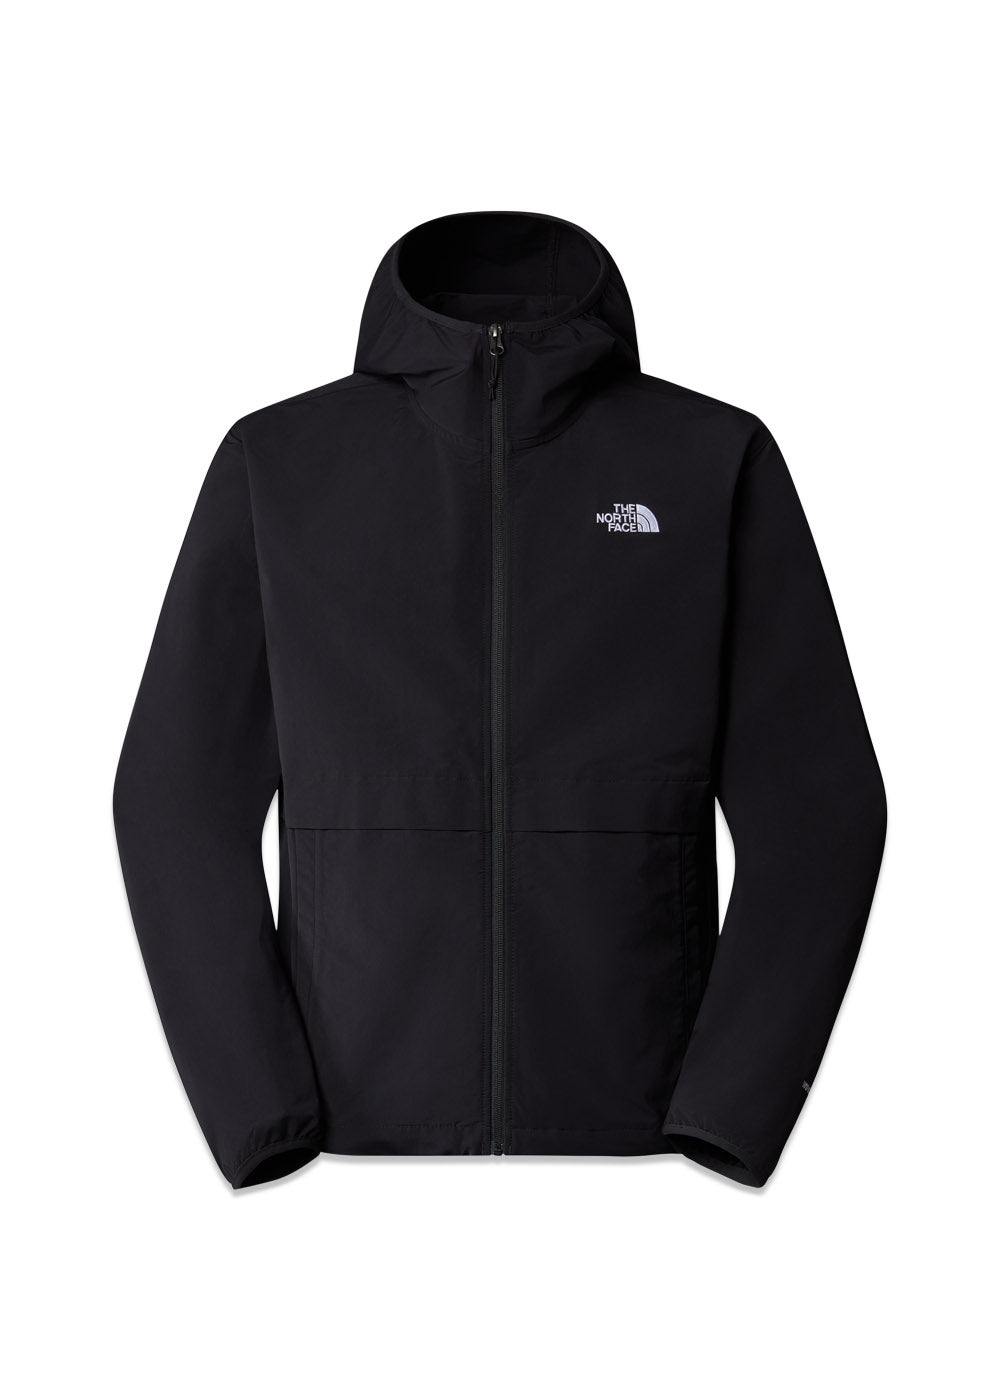 THE NORTH FACE EASY WIND FZ JACKET - Black